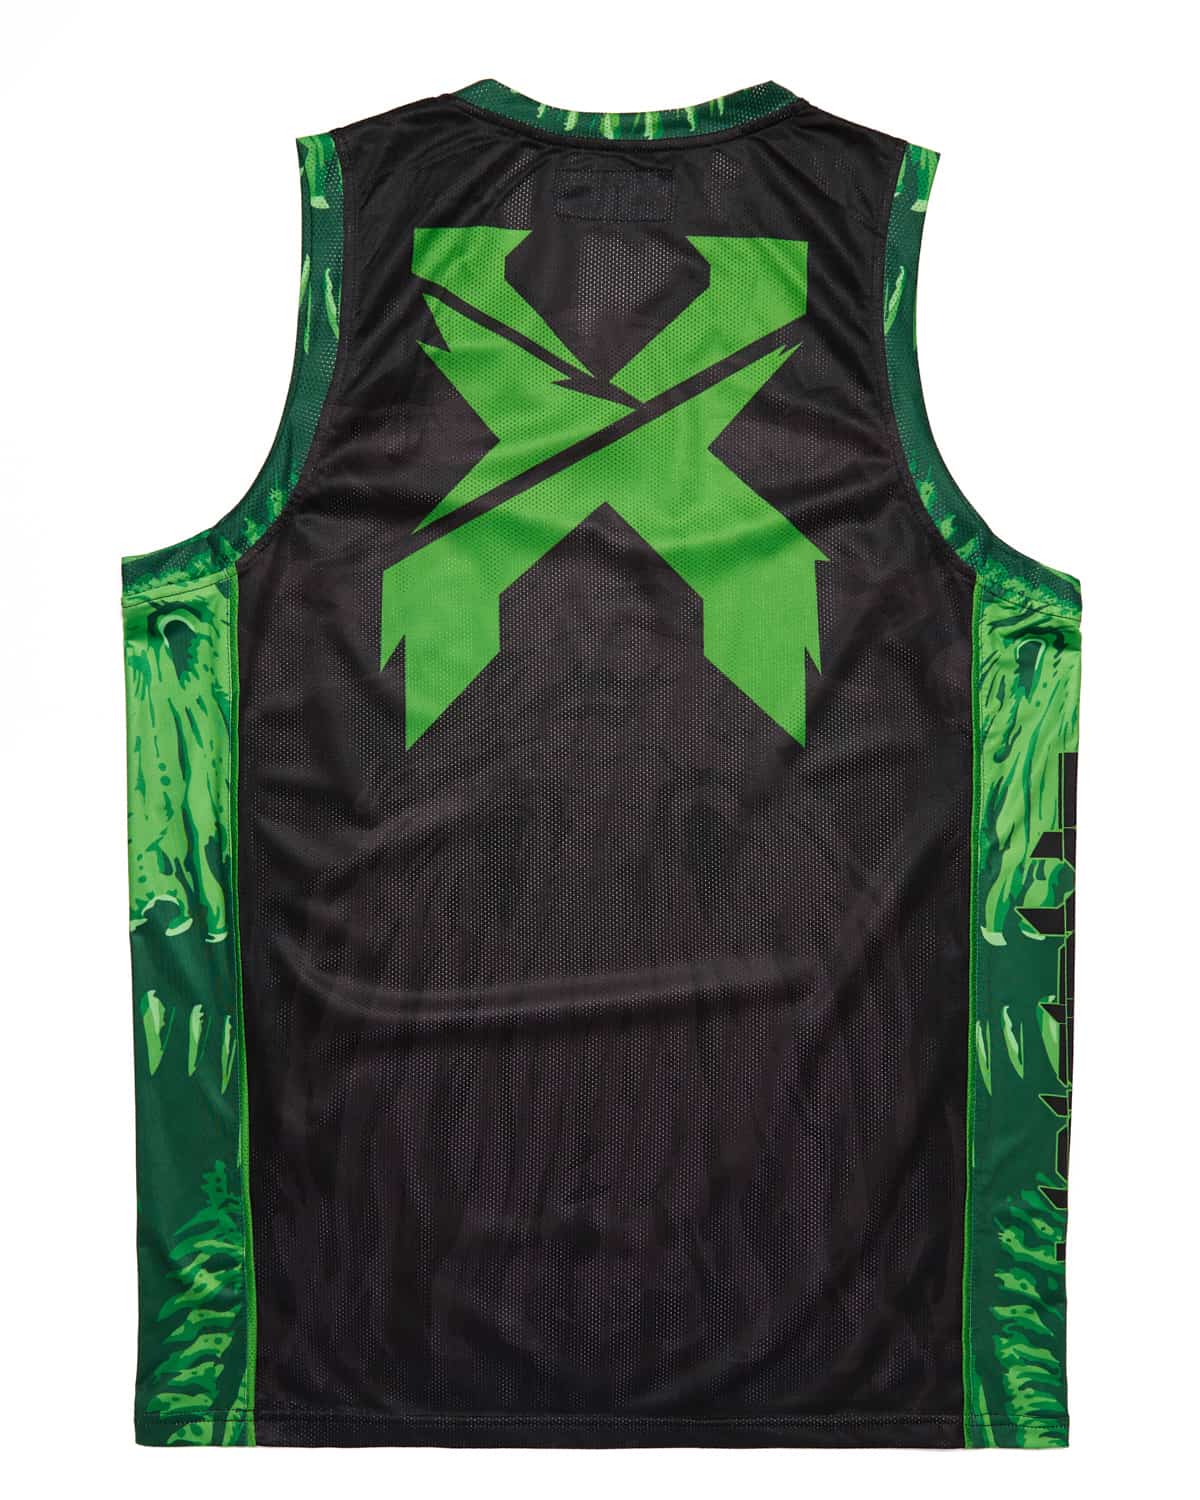 basketball jersey design green and black